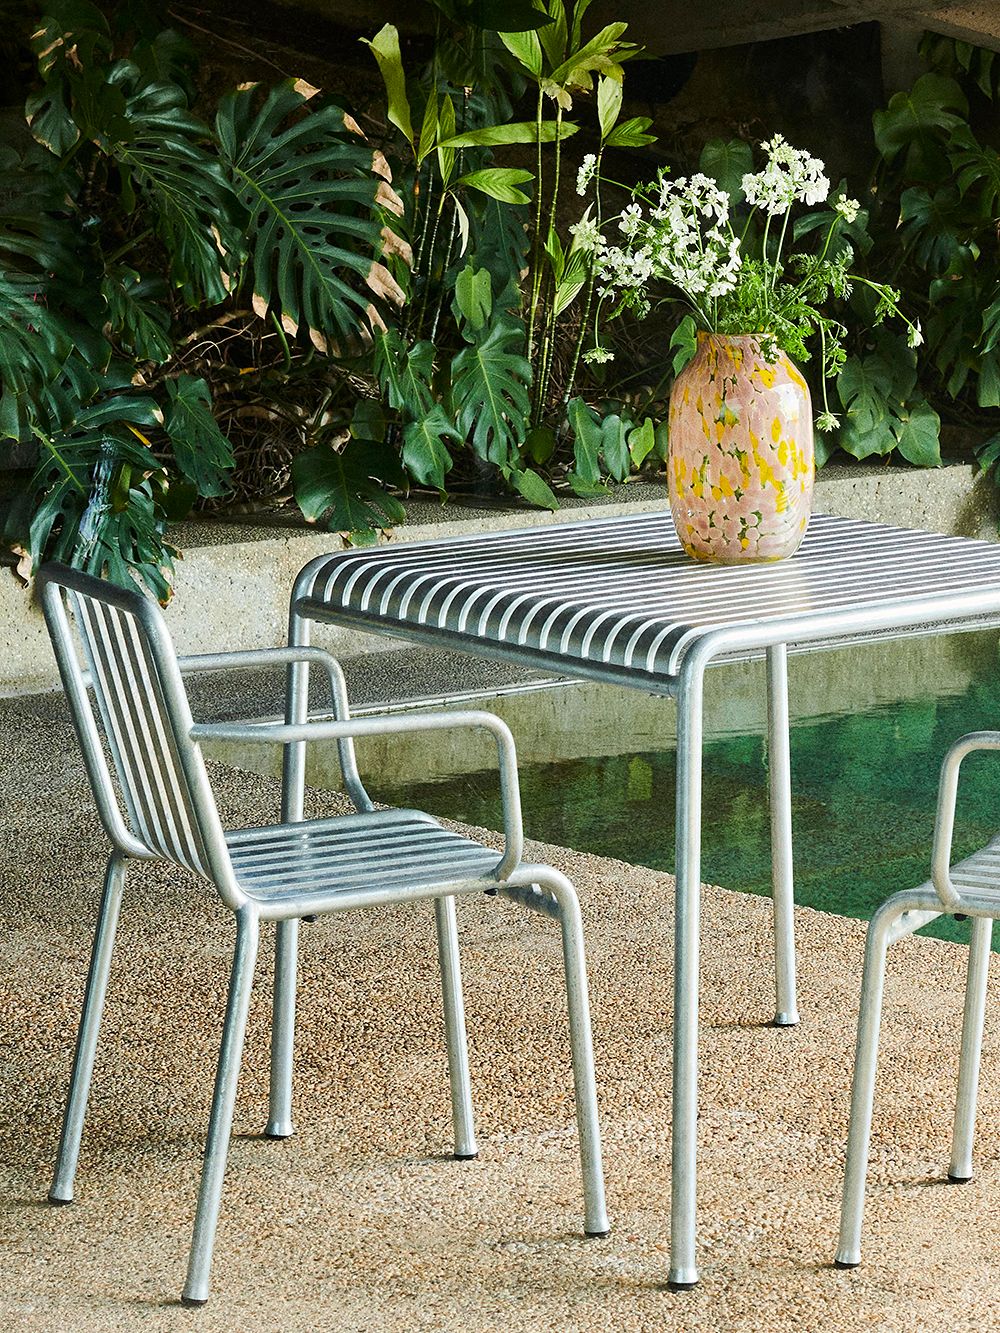 An image of HAY's Palissade patio furniture and Splash vase.